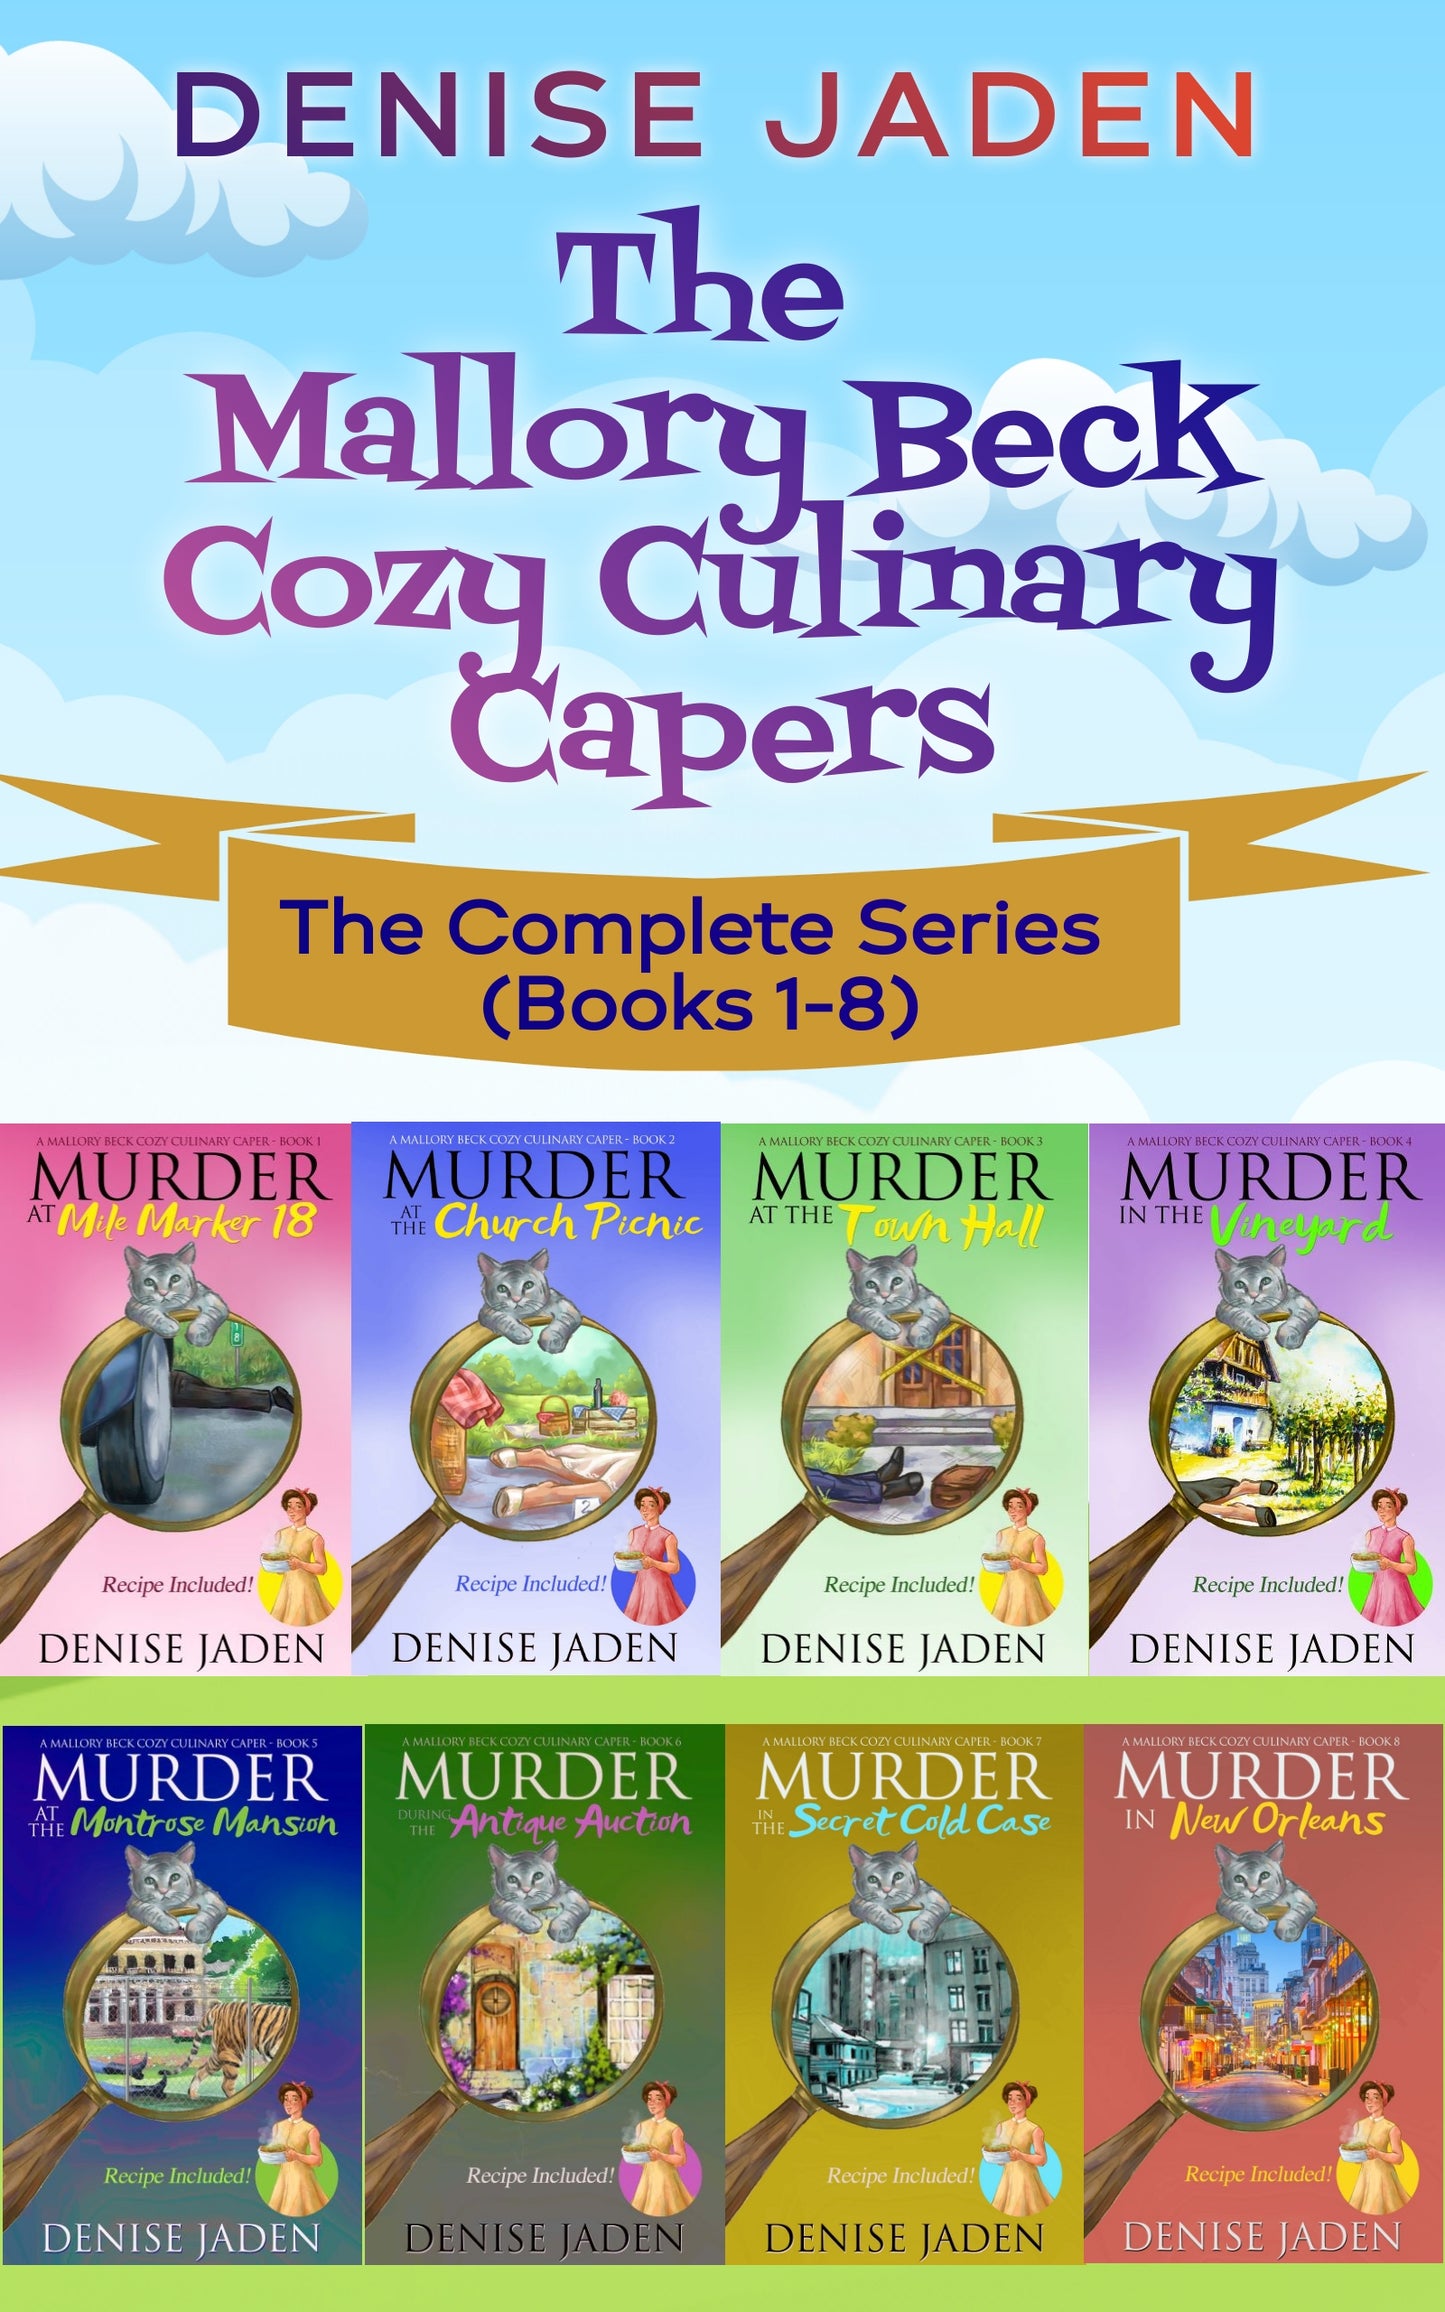 Mallory Beck Cozy Culinary Capers Paperback Book Bundle  ⭐⭐⭐⭐⭐ 4.5 (1689ratings)